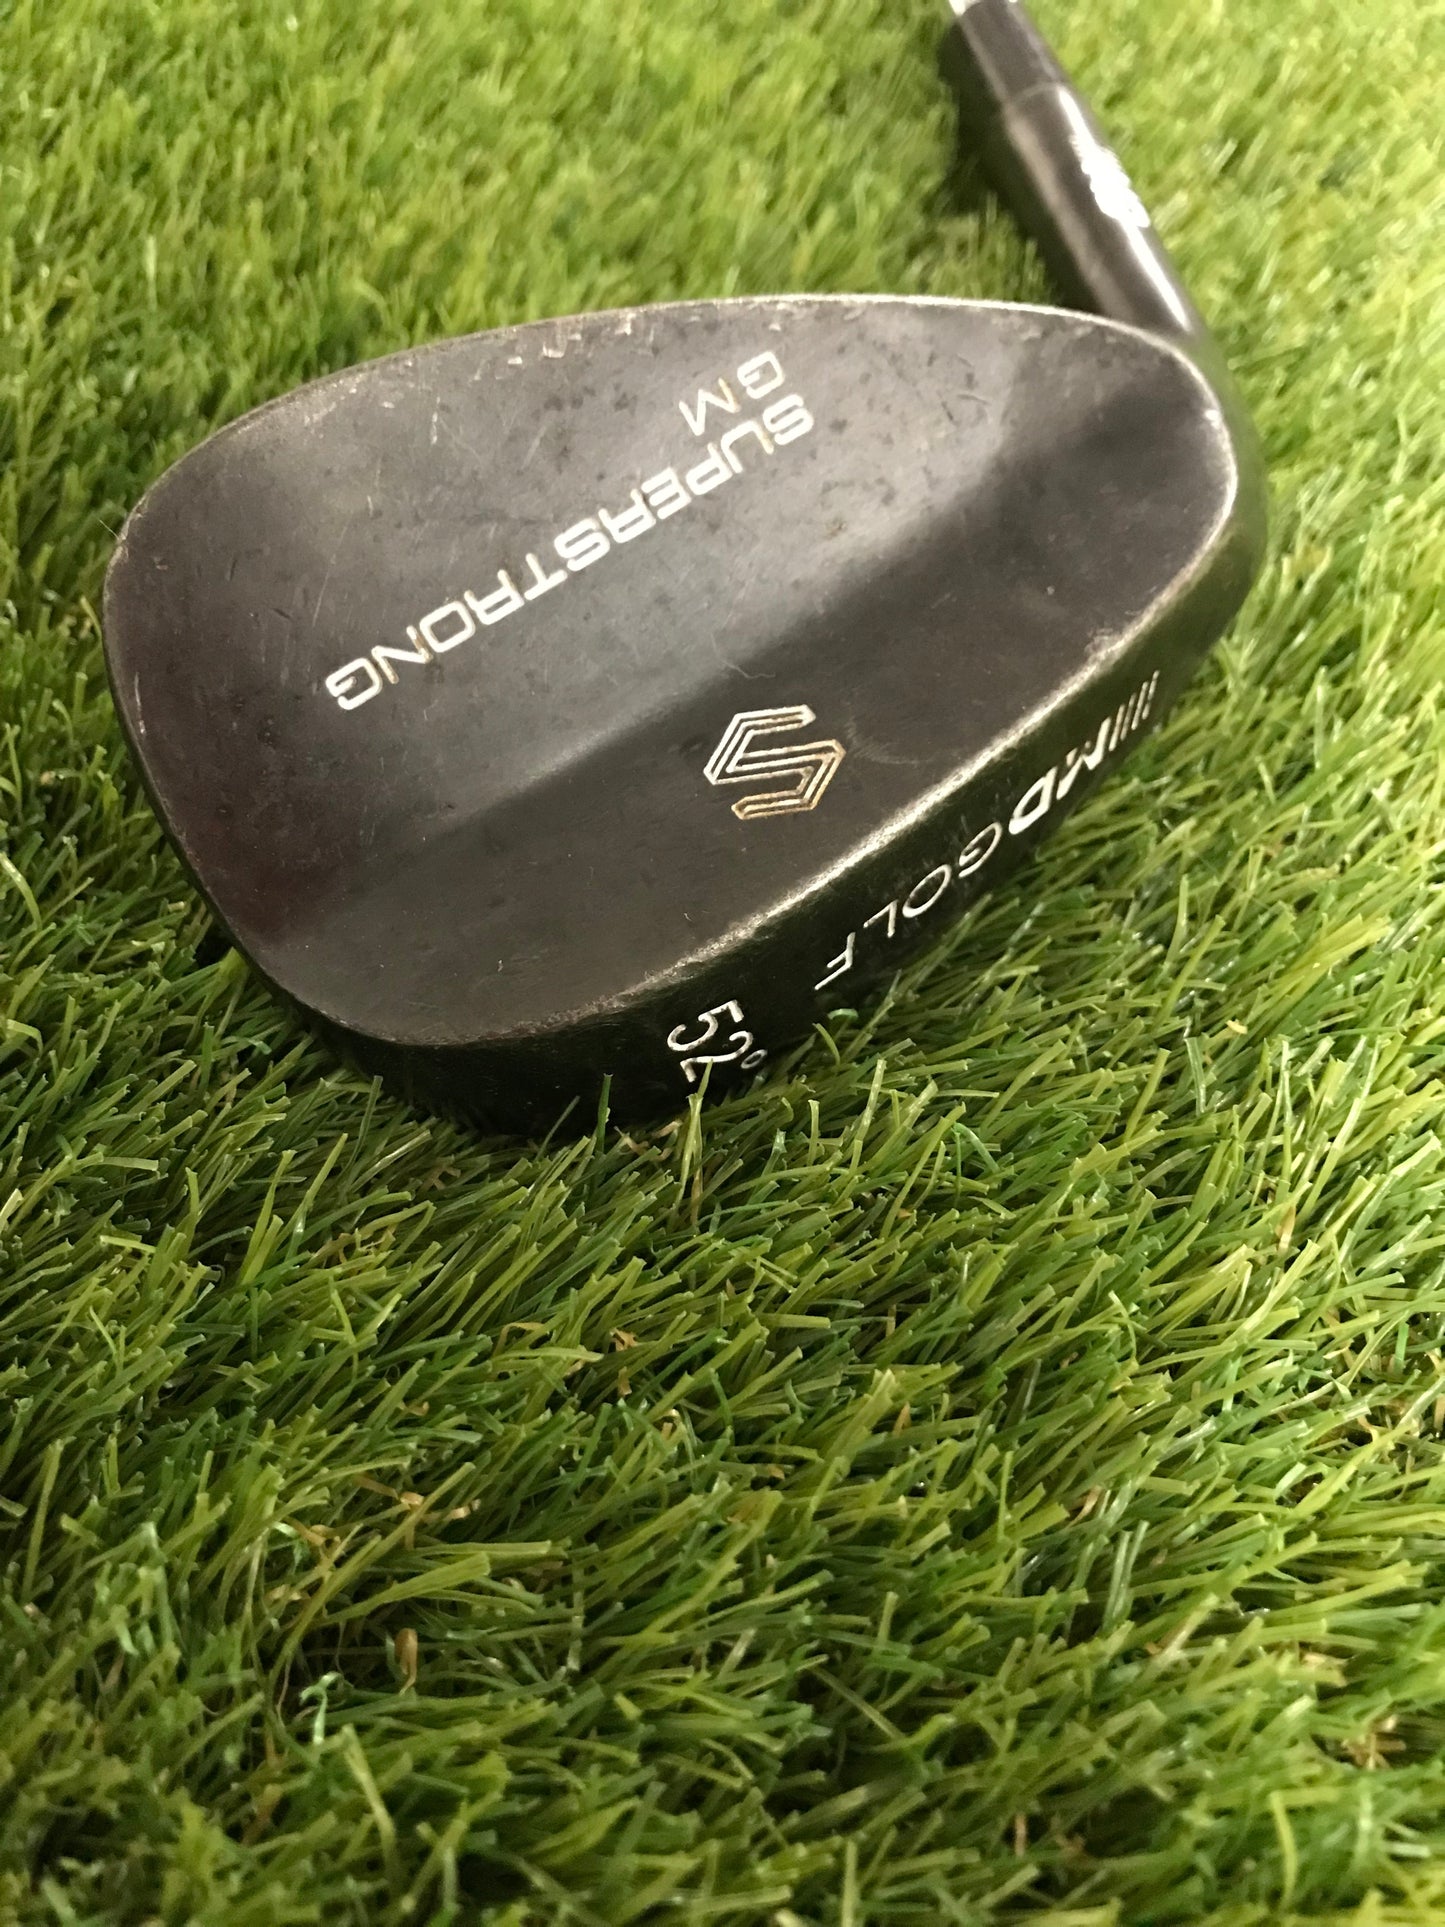 MD Golf Superstrong 52 Gap Wedge